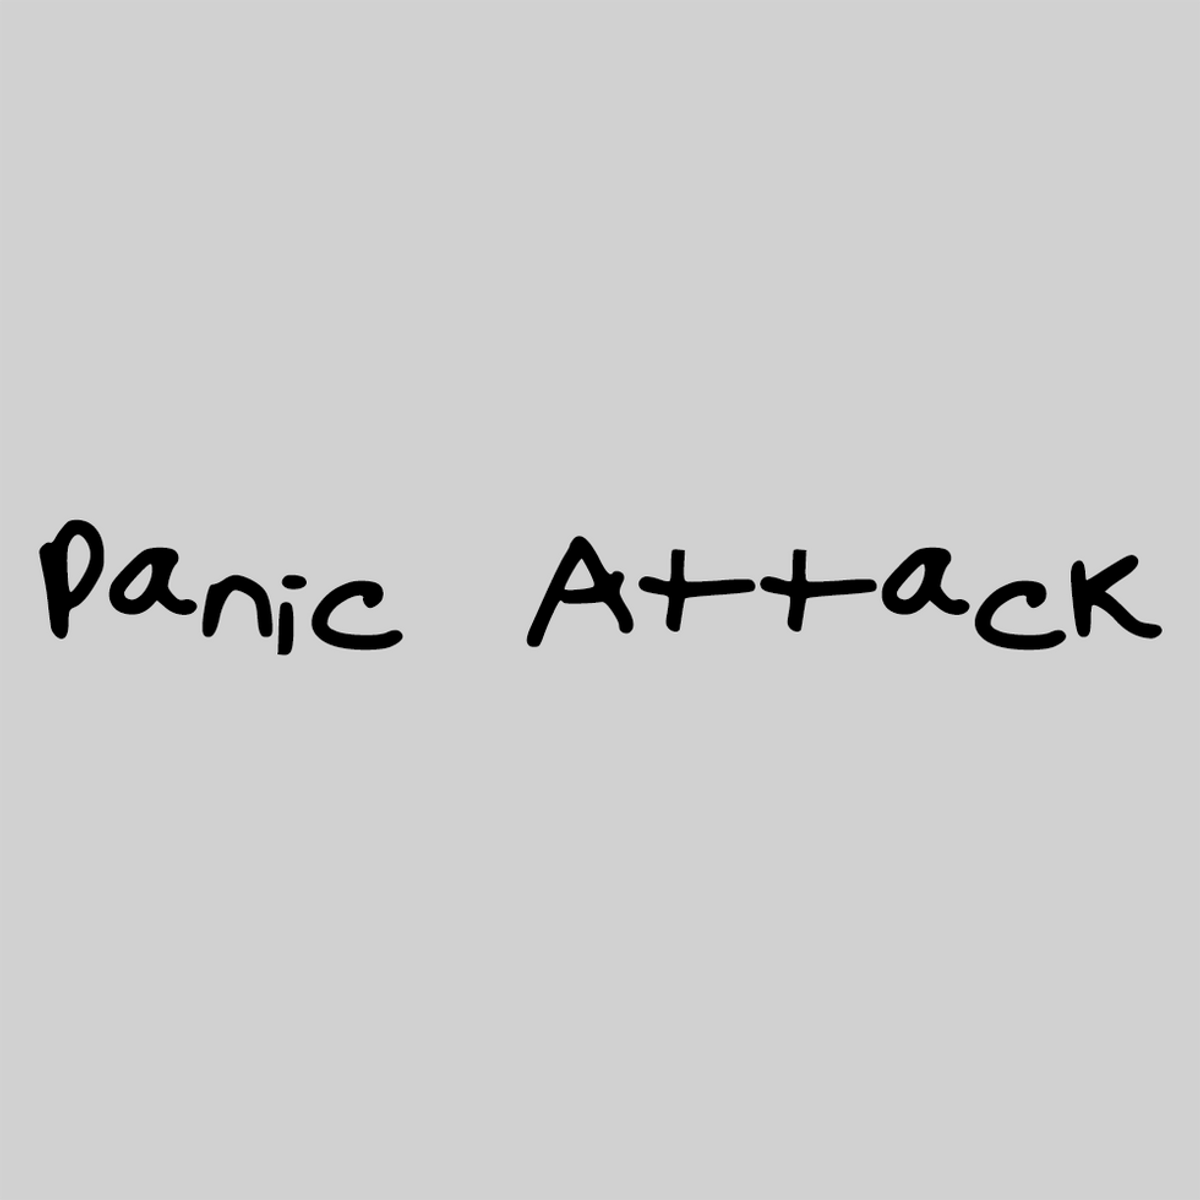 Helping With Panic Attacks